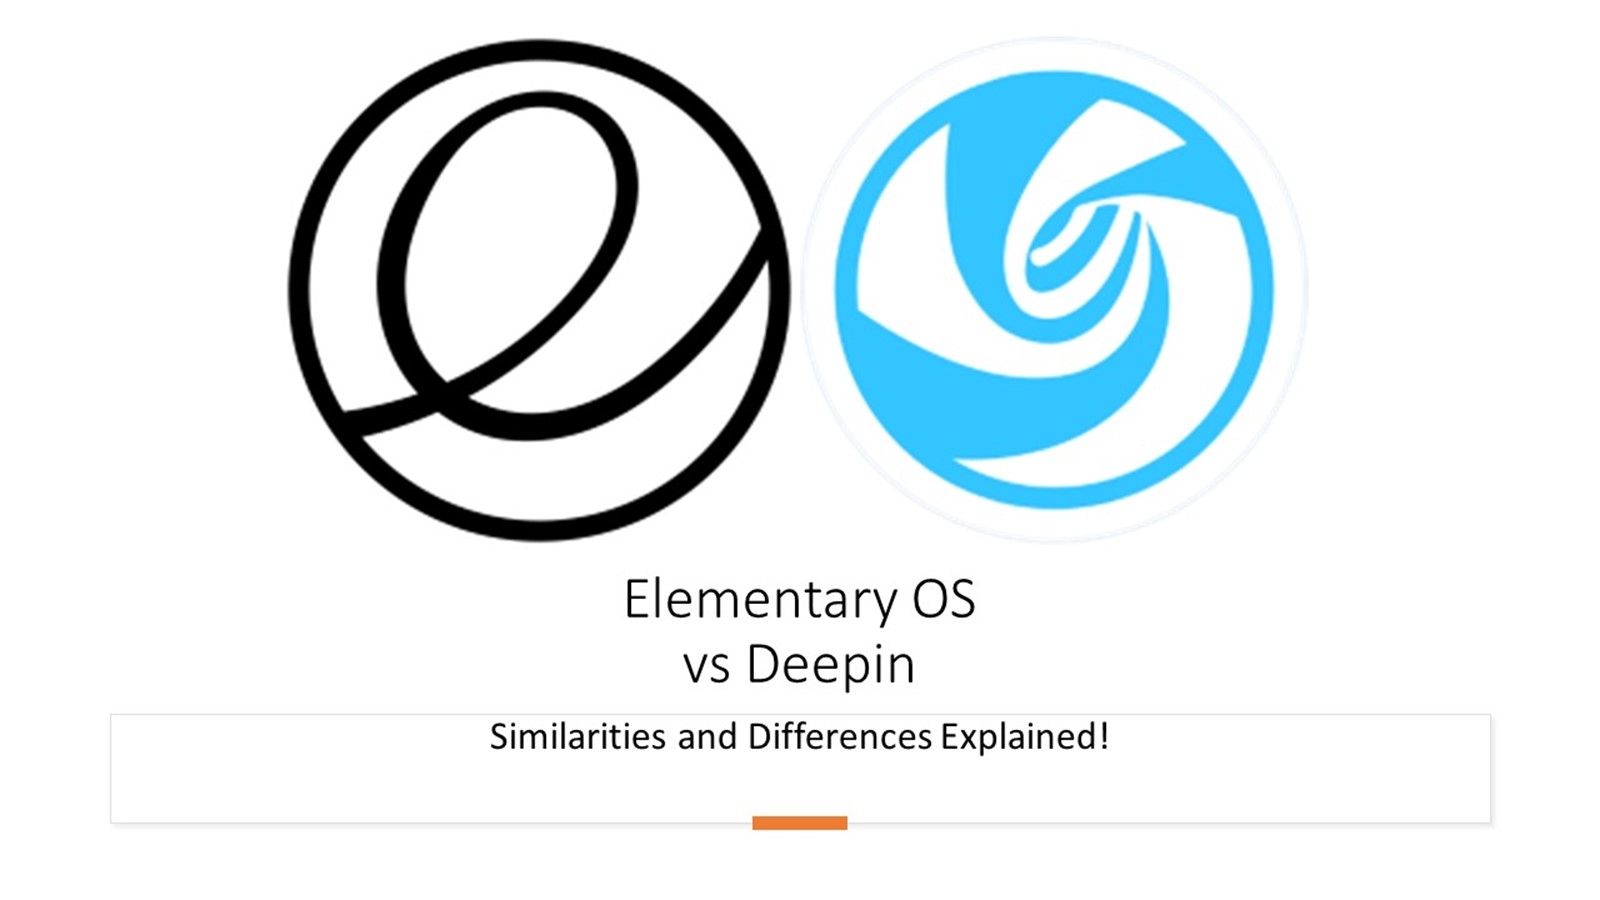 Elementary OS vs Deepin: Similarities & Differences!